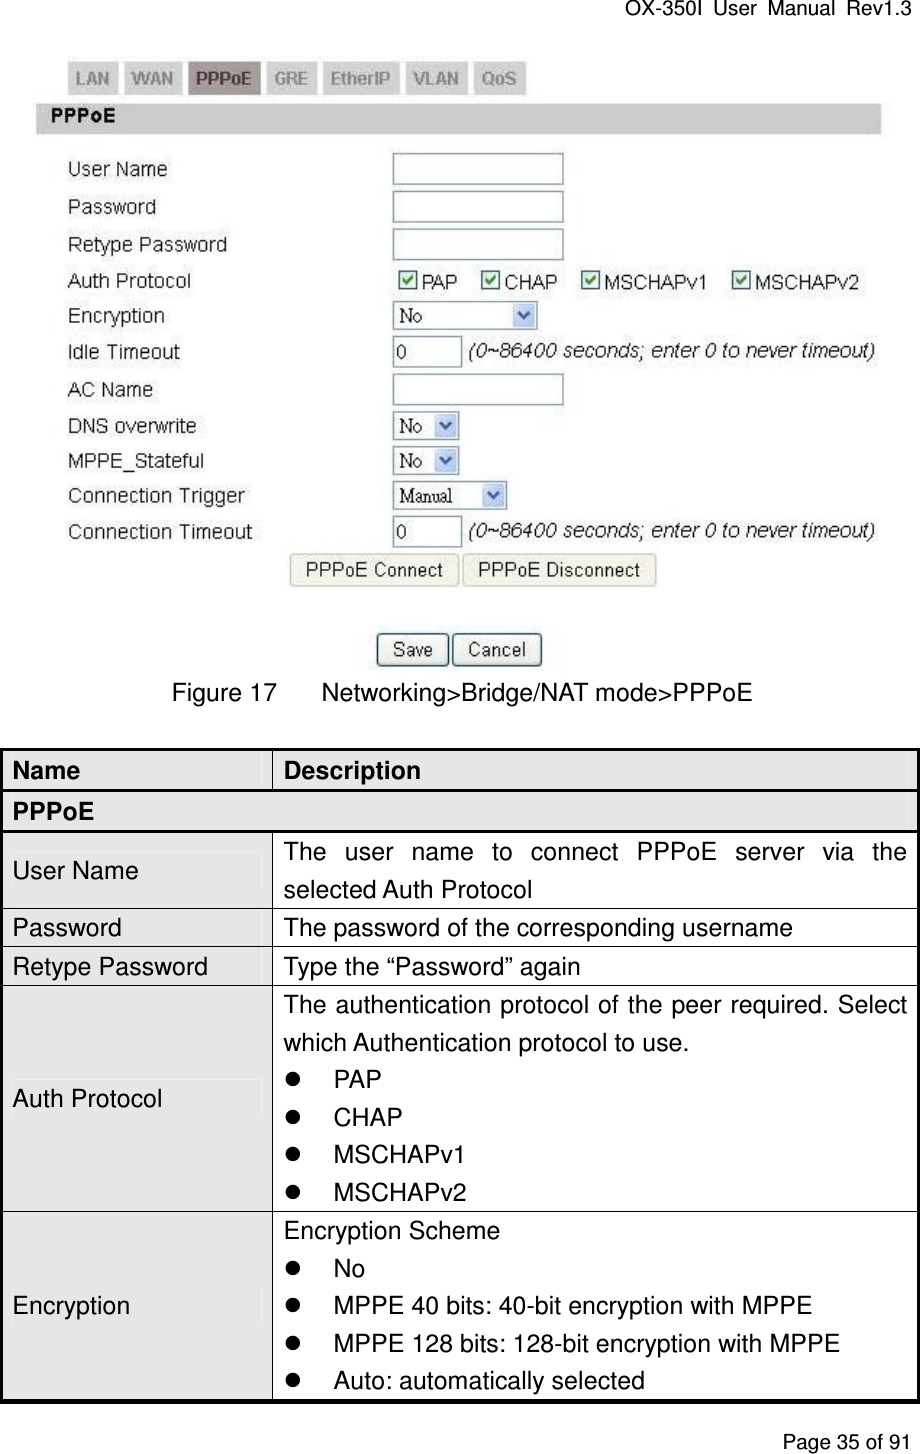 OX-350I  User  Manual  Rev1.3 Page 35 of 91  Figure 17  Networking&gt;Bridge/NAT mode&gt;PPPoE Name  Description PPPoE User Name  The  user  name  to  connect  PPPoE  server  via  the selected Auth Protocol Password  The password of the corresponding username Retype Password  Type the “Password” again Auth Protocol The authentication protocol of the peer required. Select which Authentication protocol to use.   PAP   CHAP   MSCHAPv1   MSCHAPv2 Encryption Encryption Scheme   No   MPPE 40 bits: 40-bit encryption with MPPE   MPPE 128 bits: 128-bit encryption with MPPE   Auto: automatically selected 